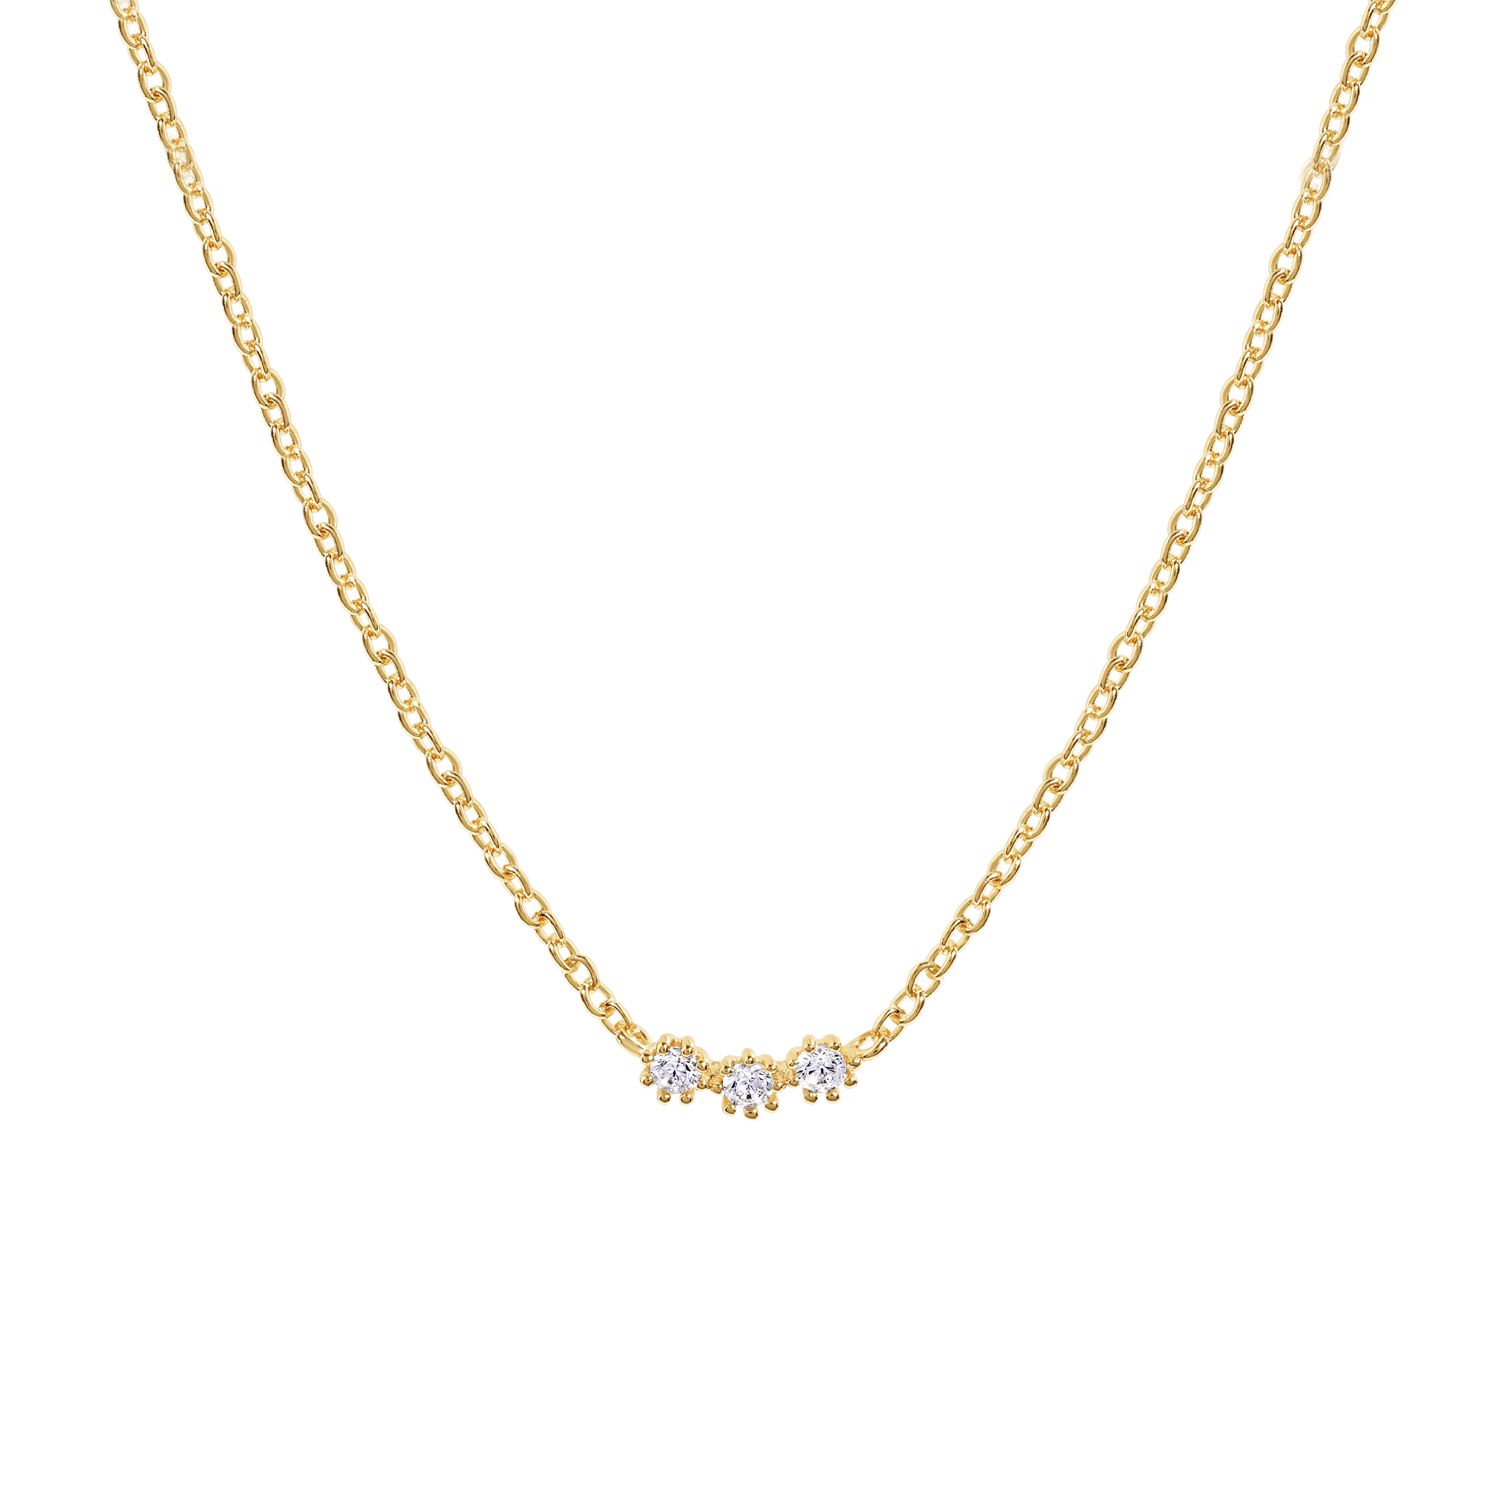 Luxurious and elegant necklace with cubic zirconia in gold